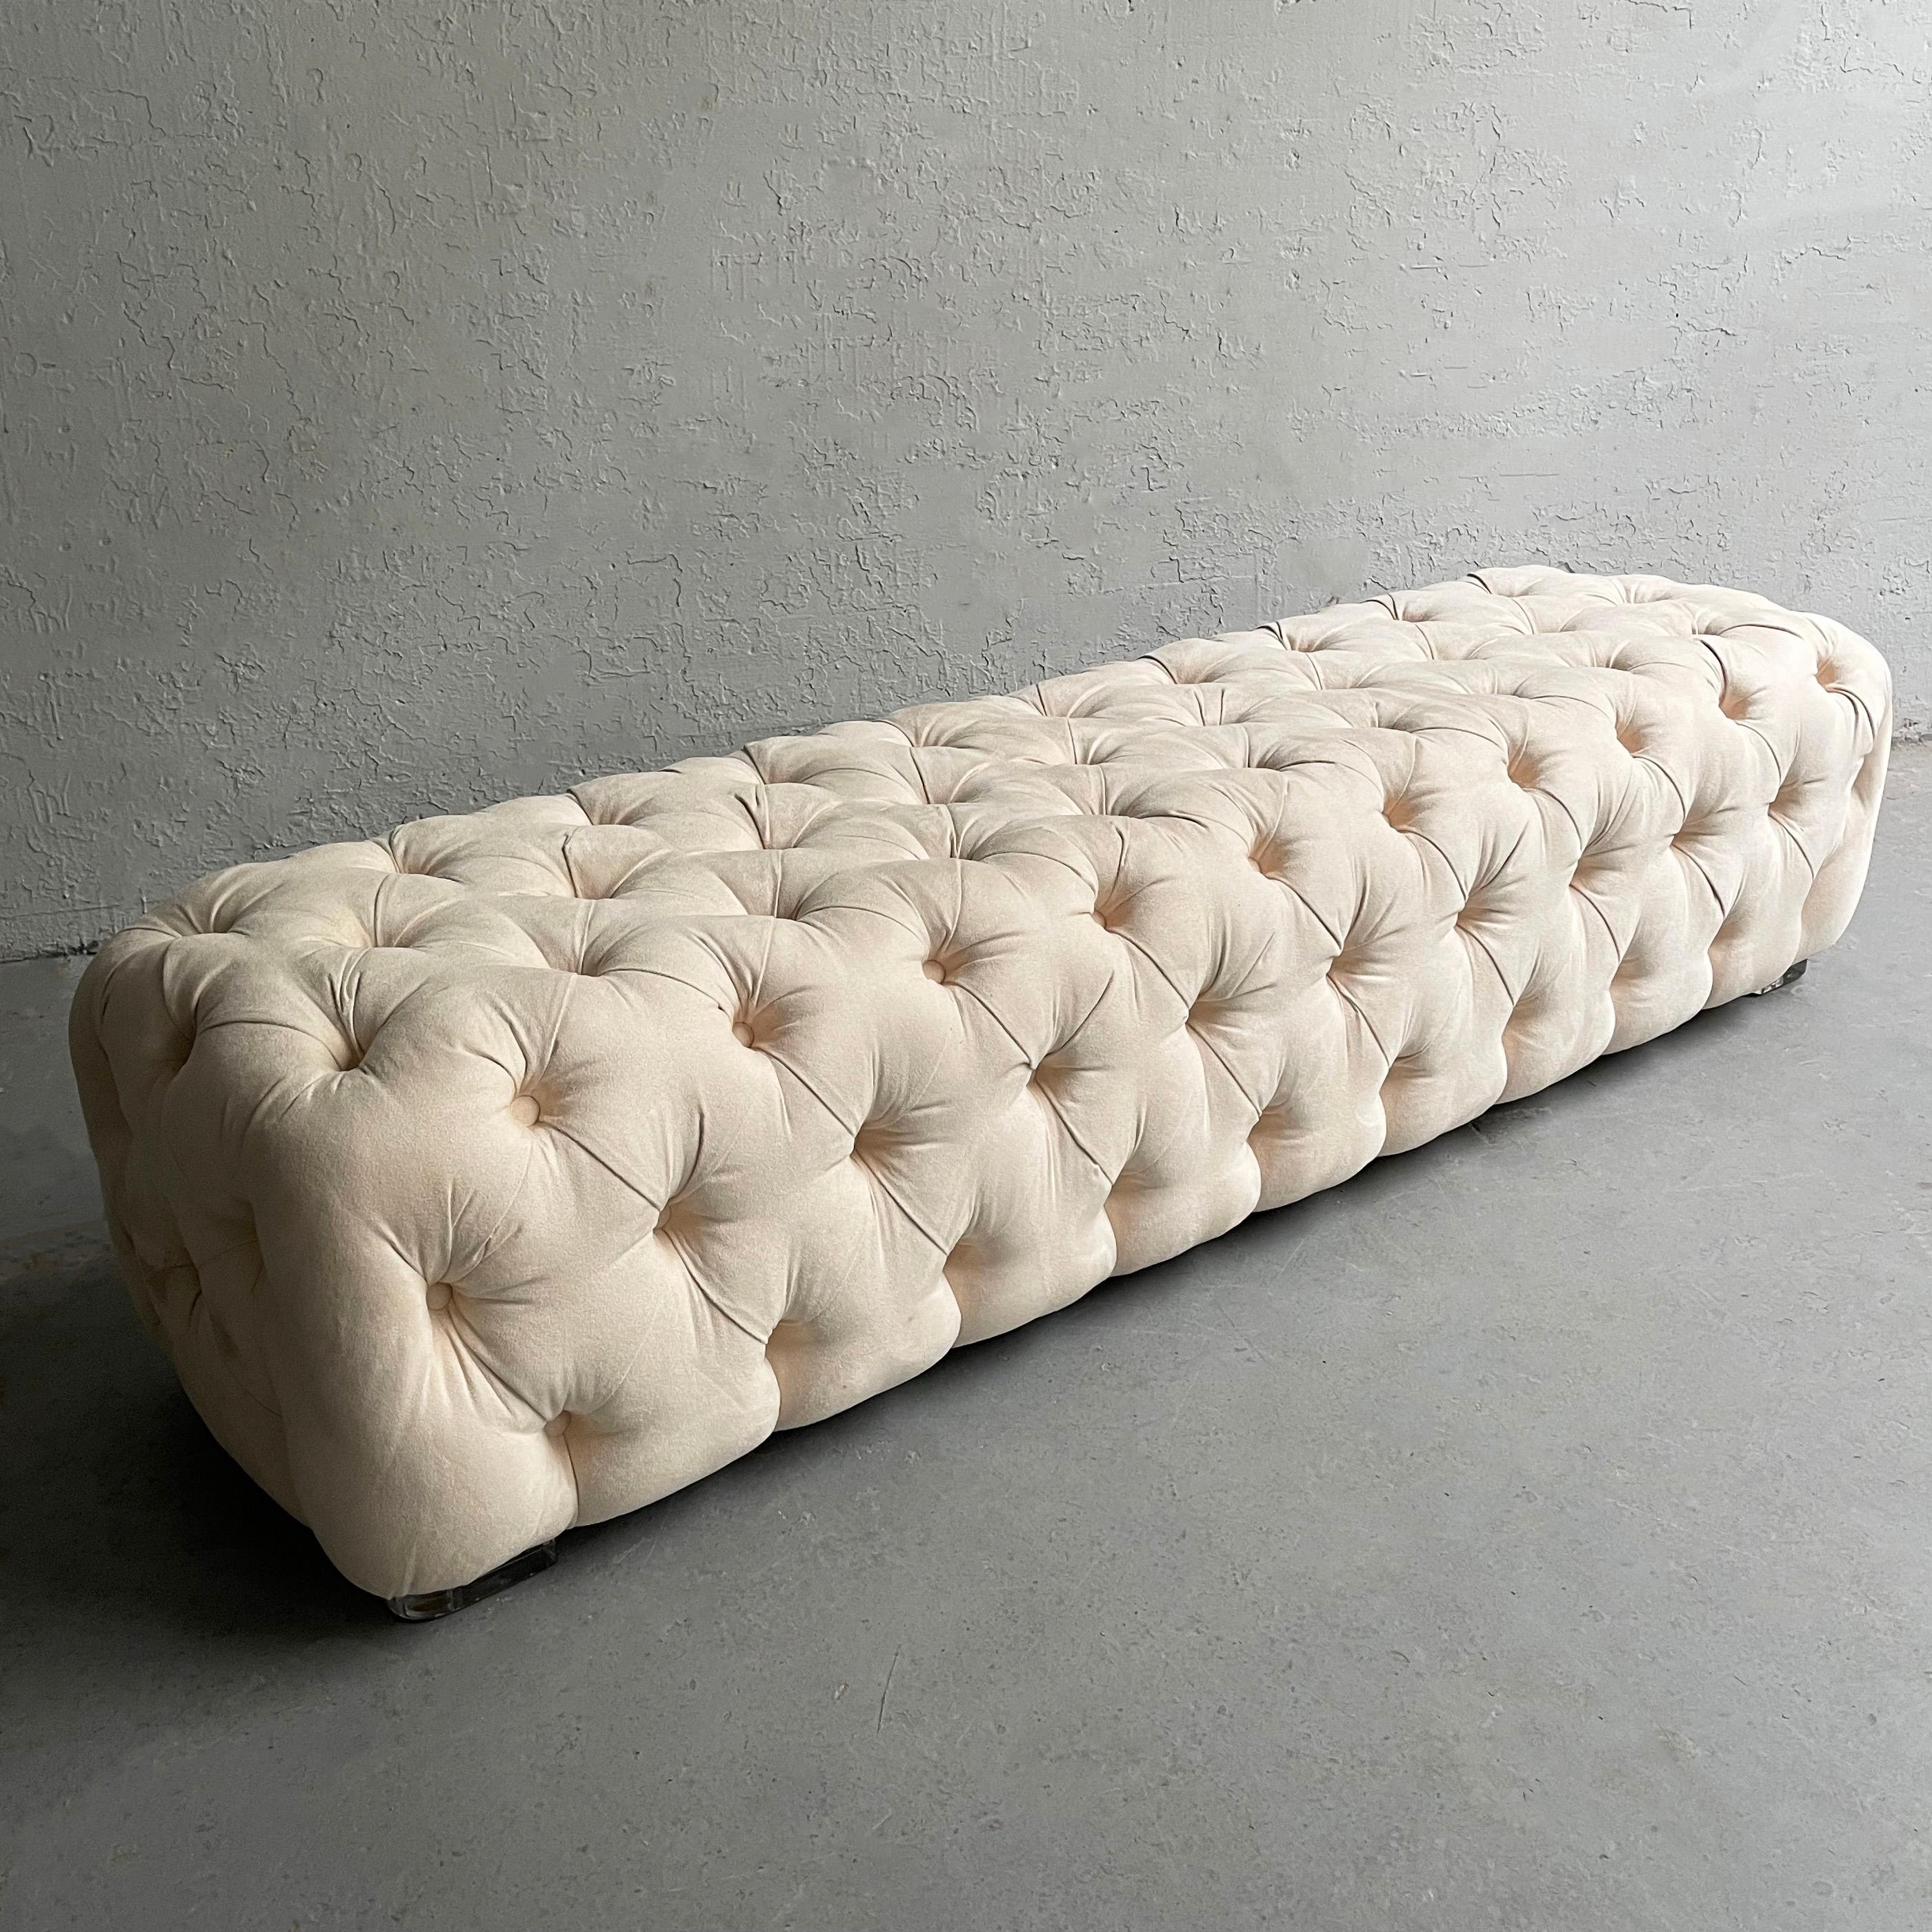 Cream Tufted Ultrasuede Shlomi Haziza Bench In Good Condition For Sale In Brooklyn, NY